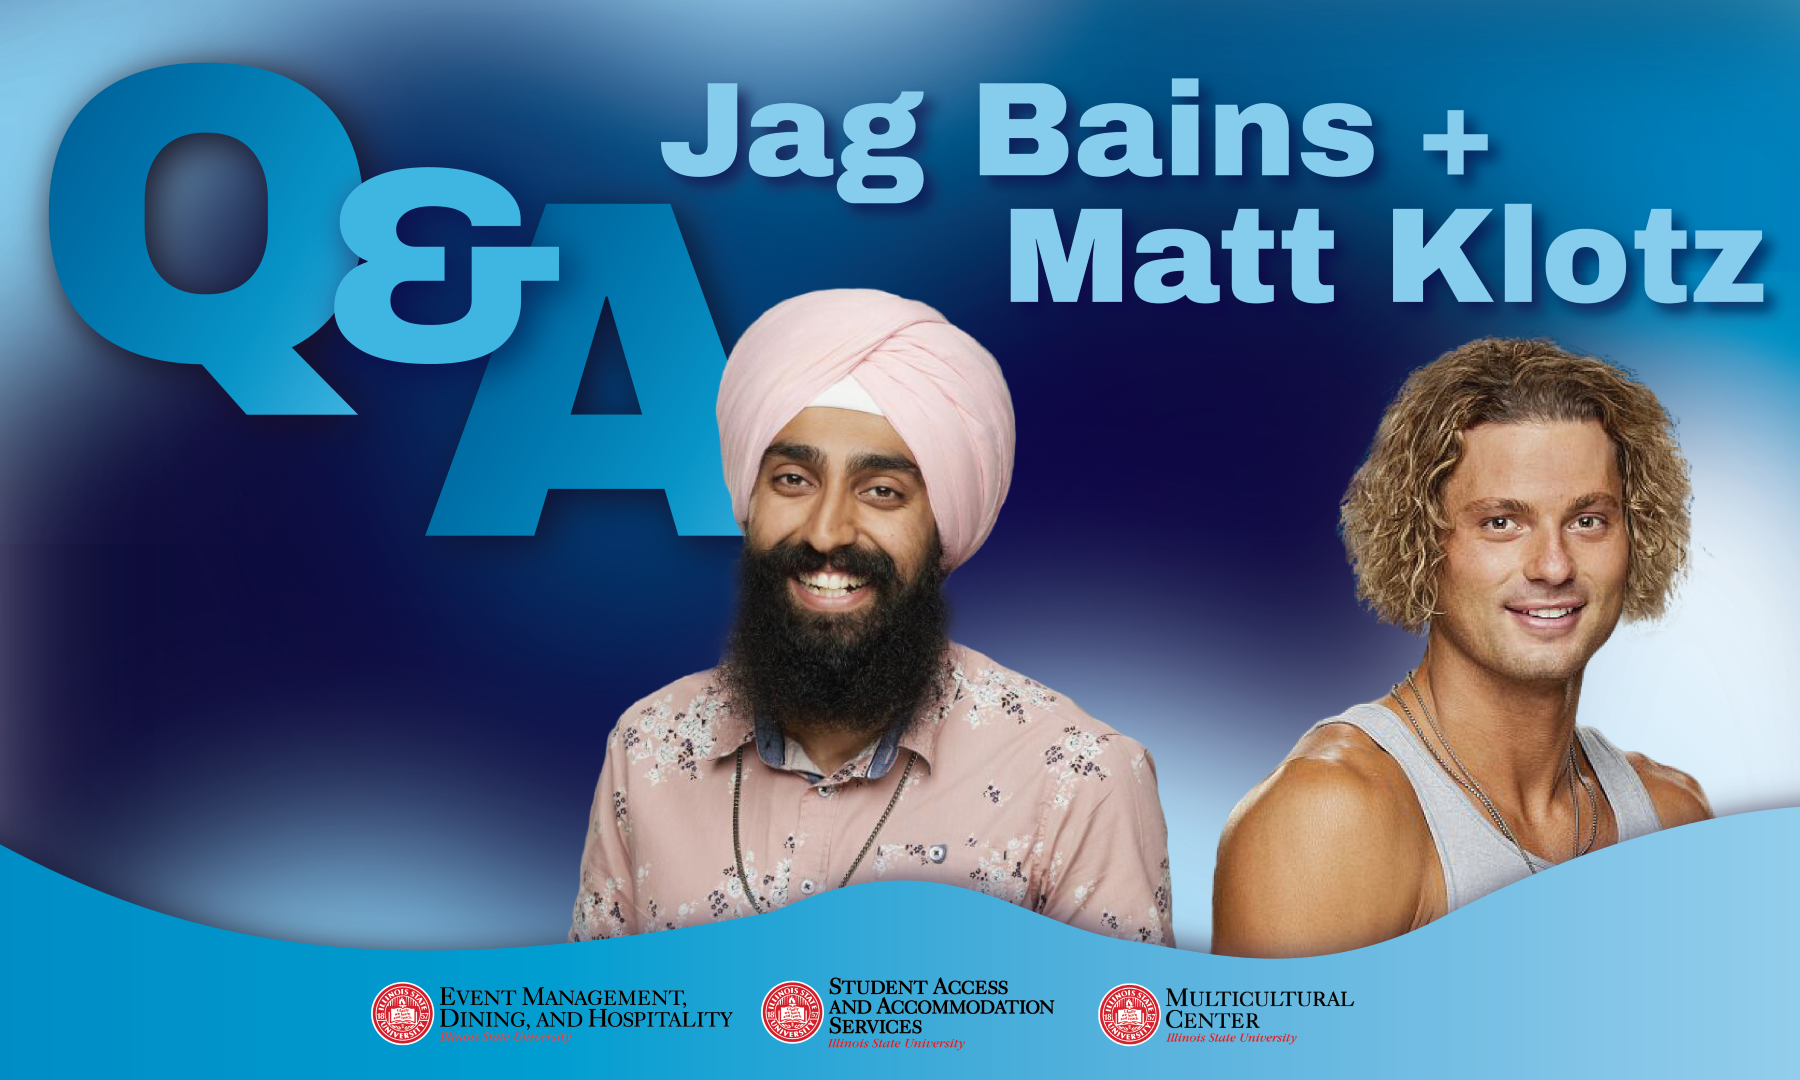 Jag Bains and Matt Klotz headshots with Q+A next to them and sponsor logos on blue background. Jag Bains is wearing traditional Sikh turban.